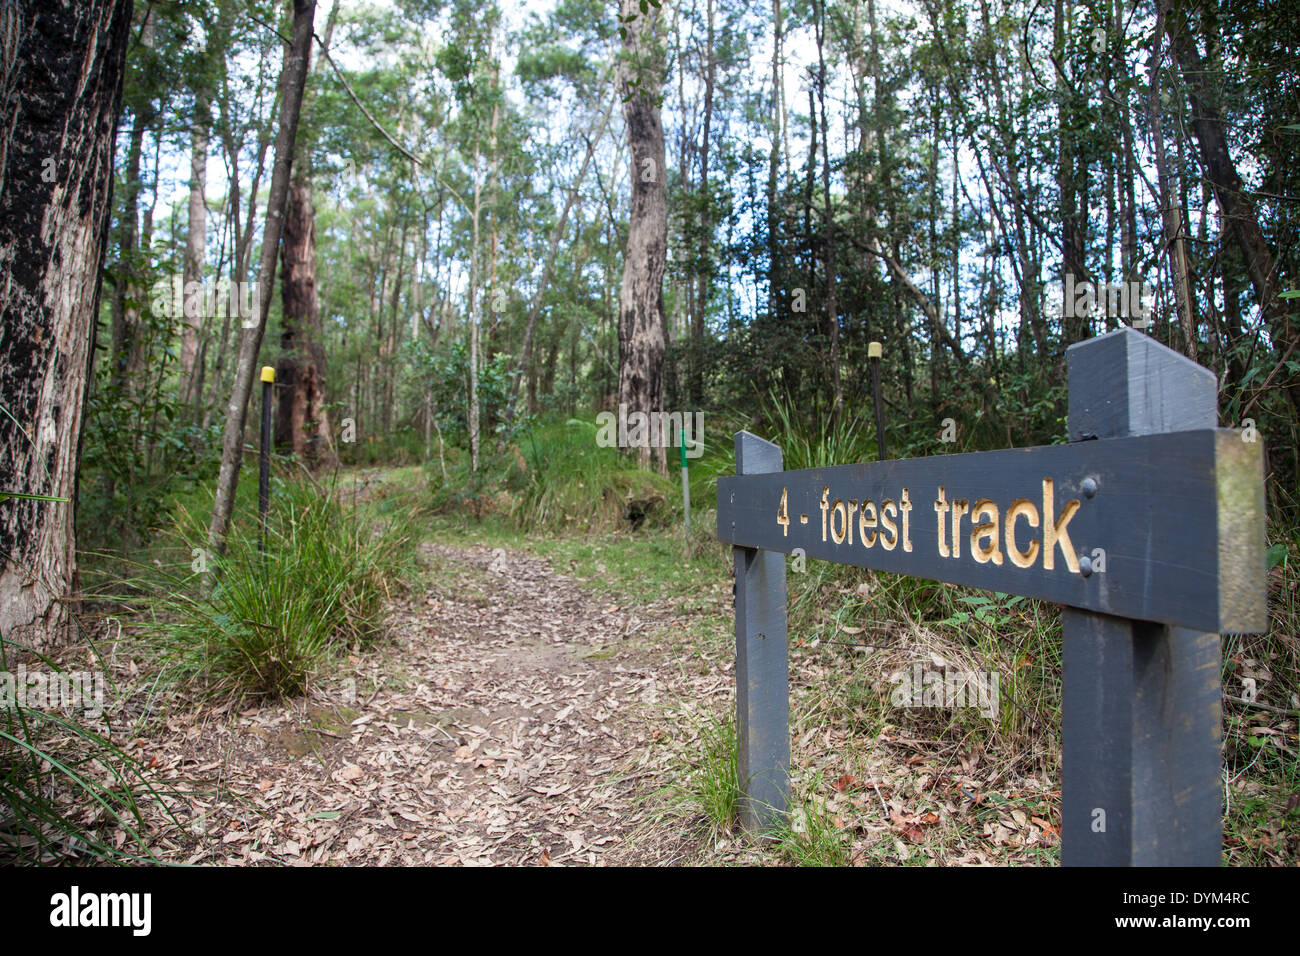 A signpost showing a forest track in a nature reserve in Australia Stock Photo